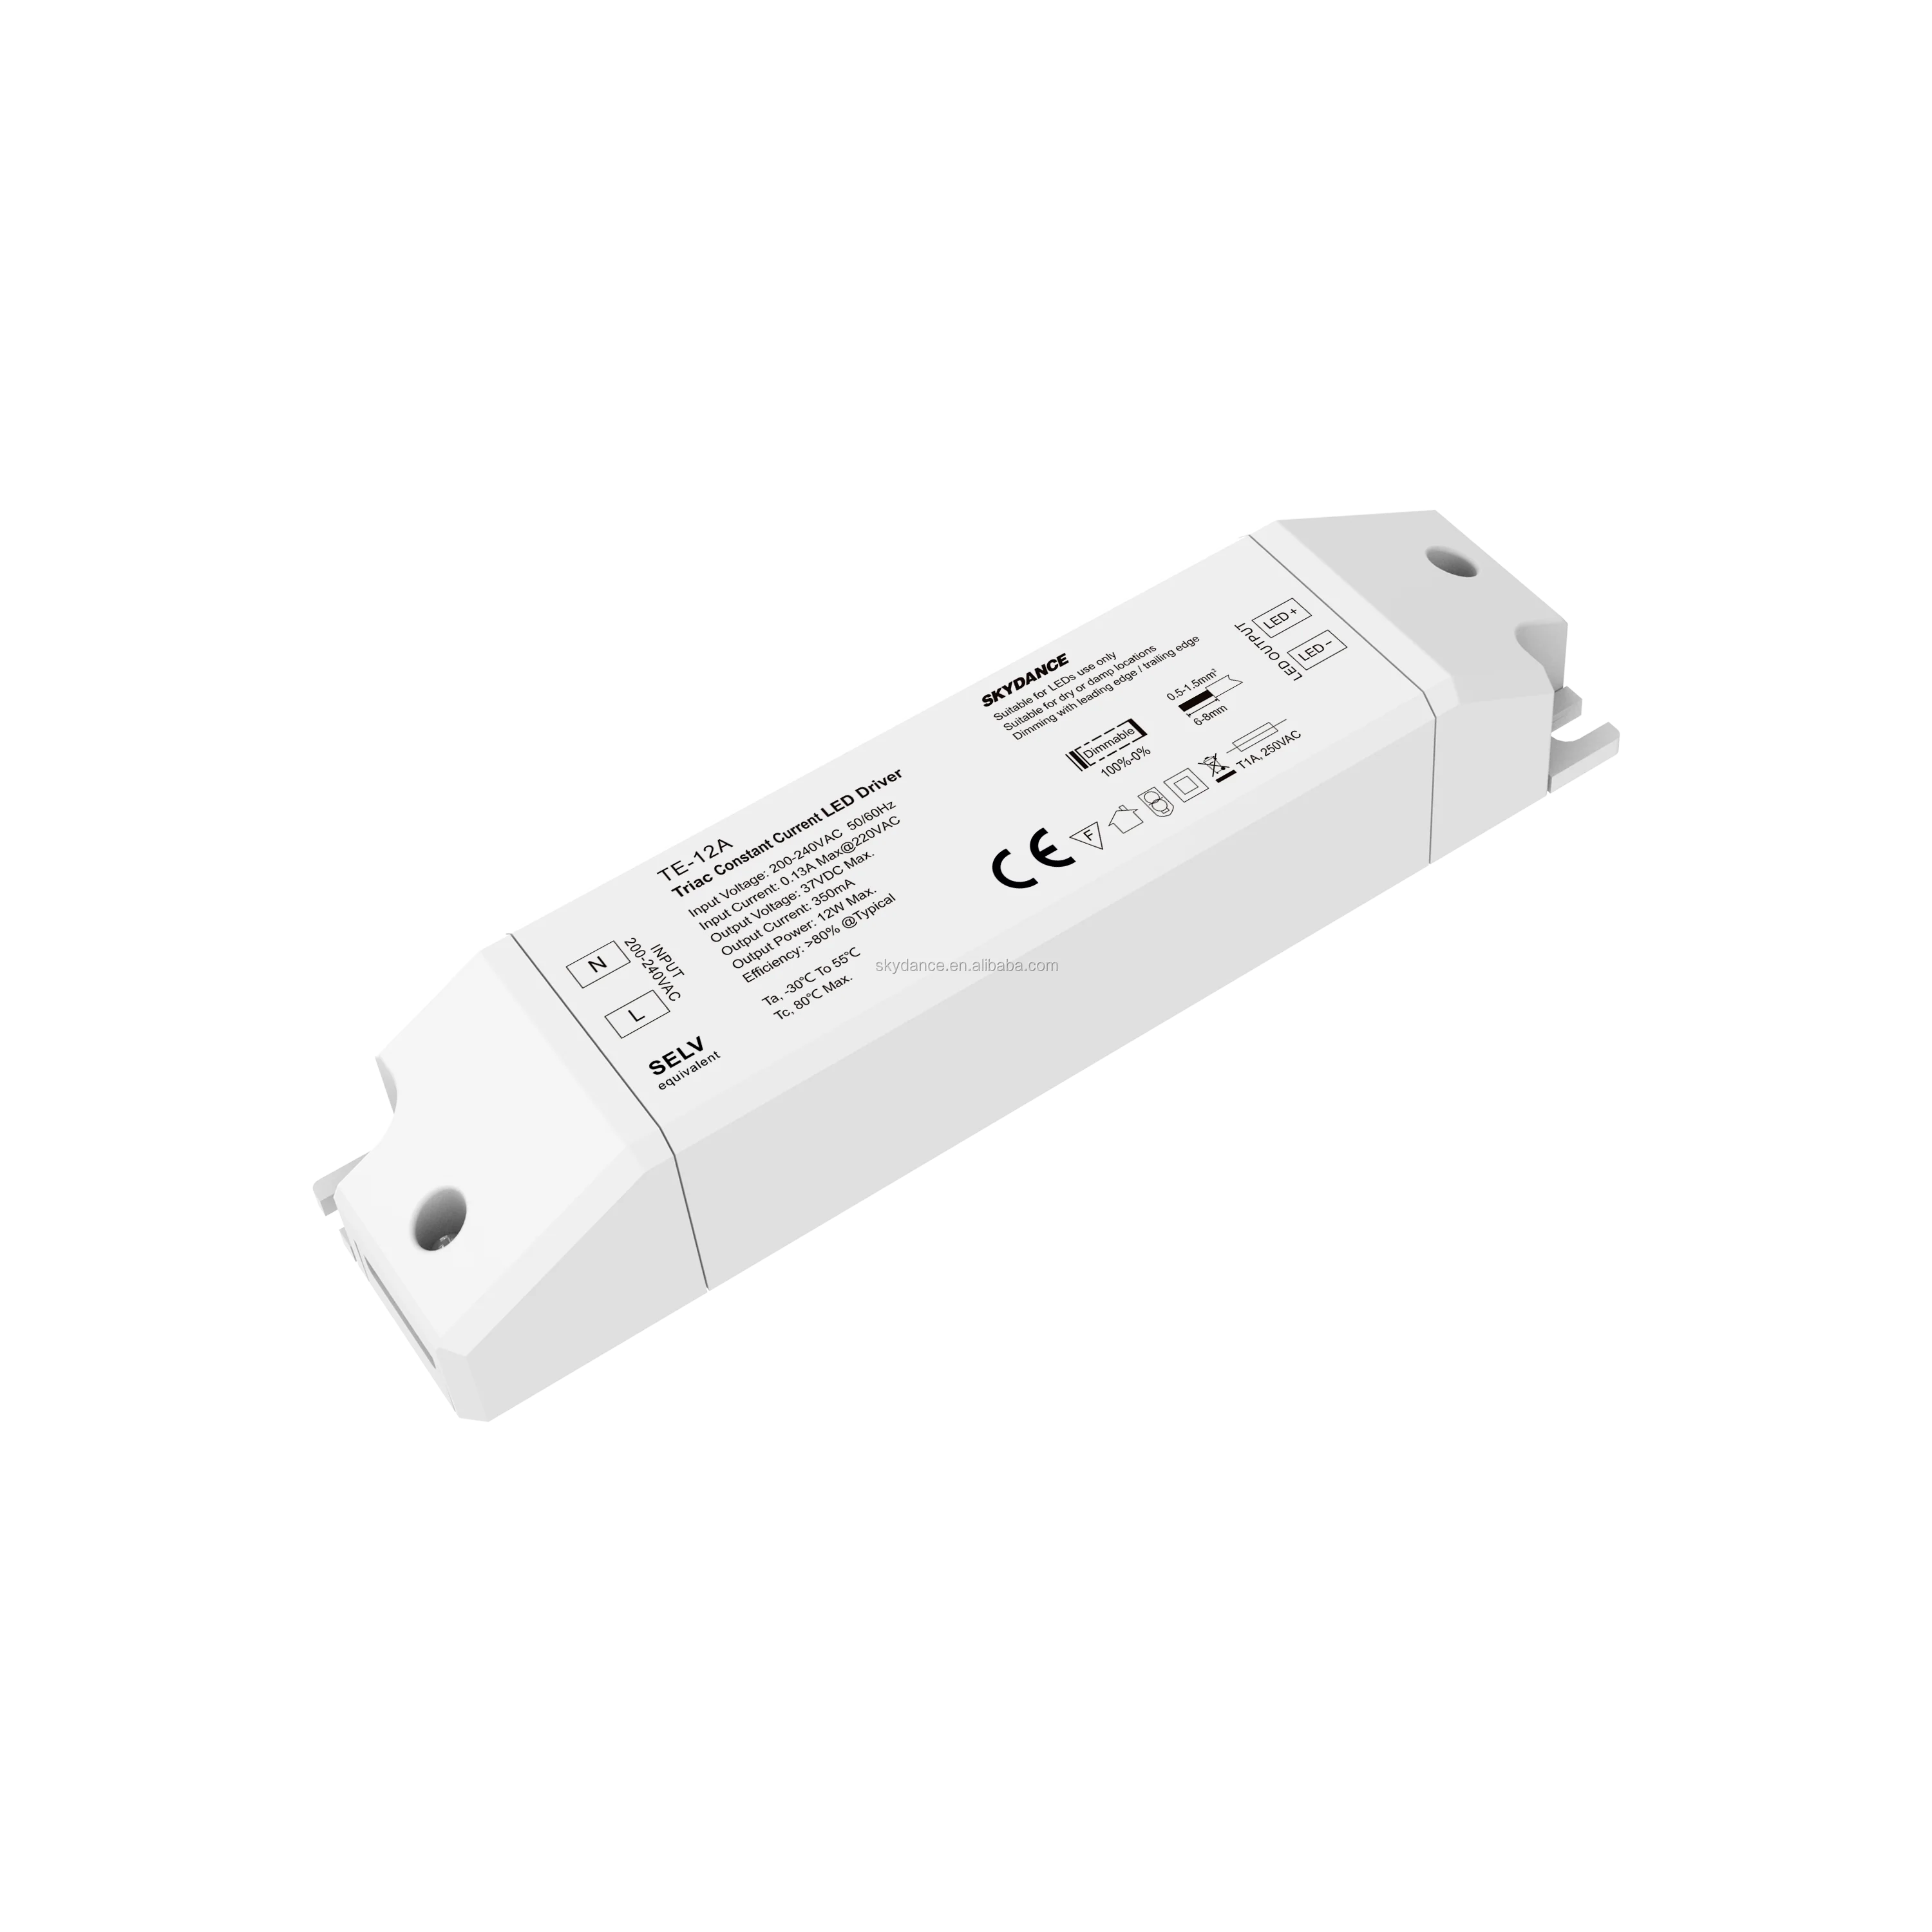 Zwijgend Monet Correspondentie Skydance Te-12a 12w 1 Channel Pwm Ac Push-dim Constant Current Triac Elv  Dimmable Driver - Buy 12w Dimmable Led Driver,Pwm Dimmable Led Driver,1  Channel Constant Current Led Driver Product on Alibaba.com